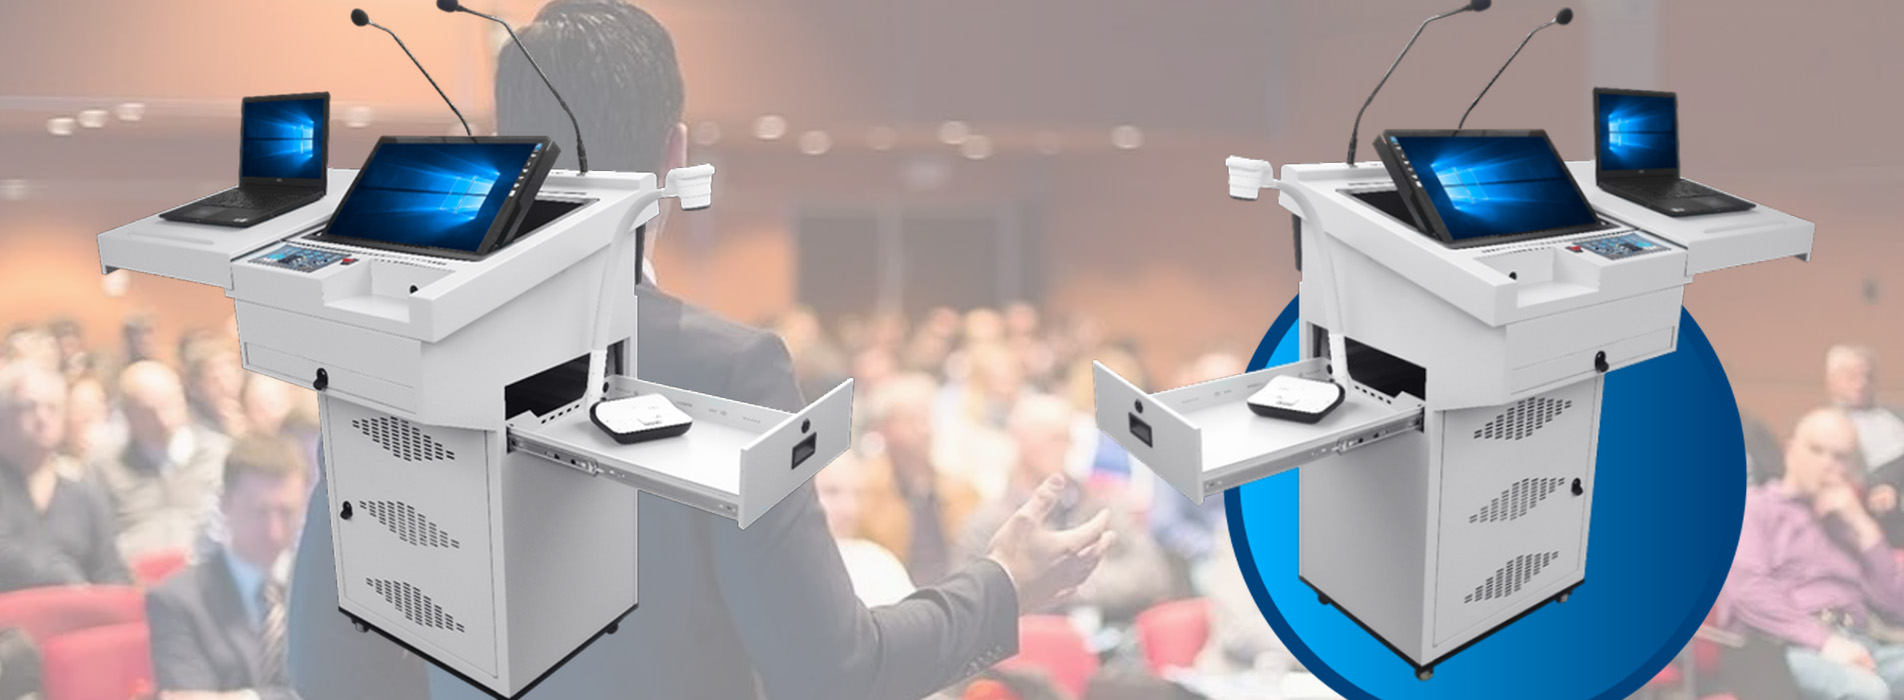 Digital Podiums are a new online marketing option to help you succeed in the digital space